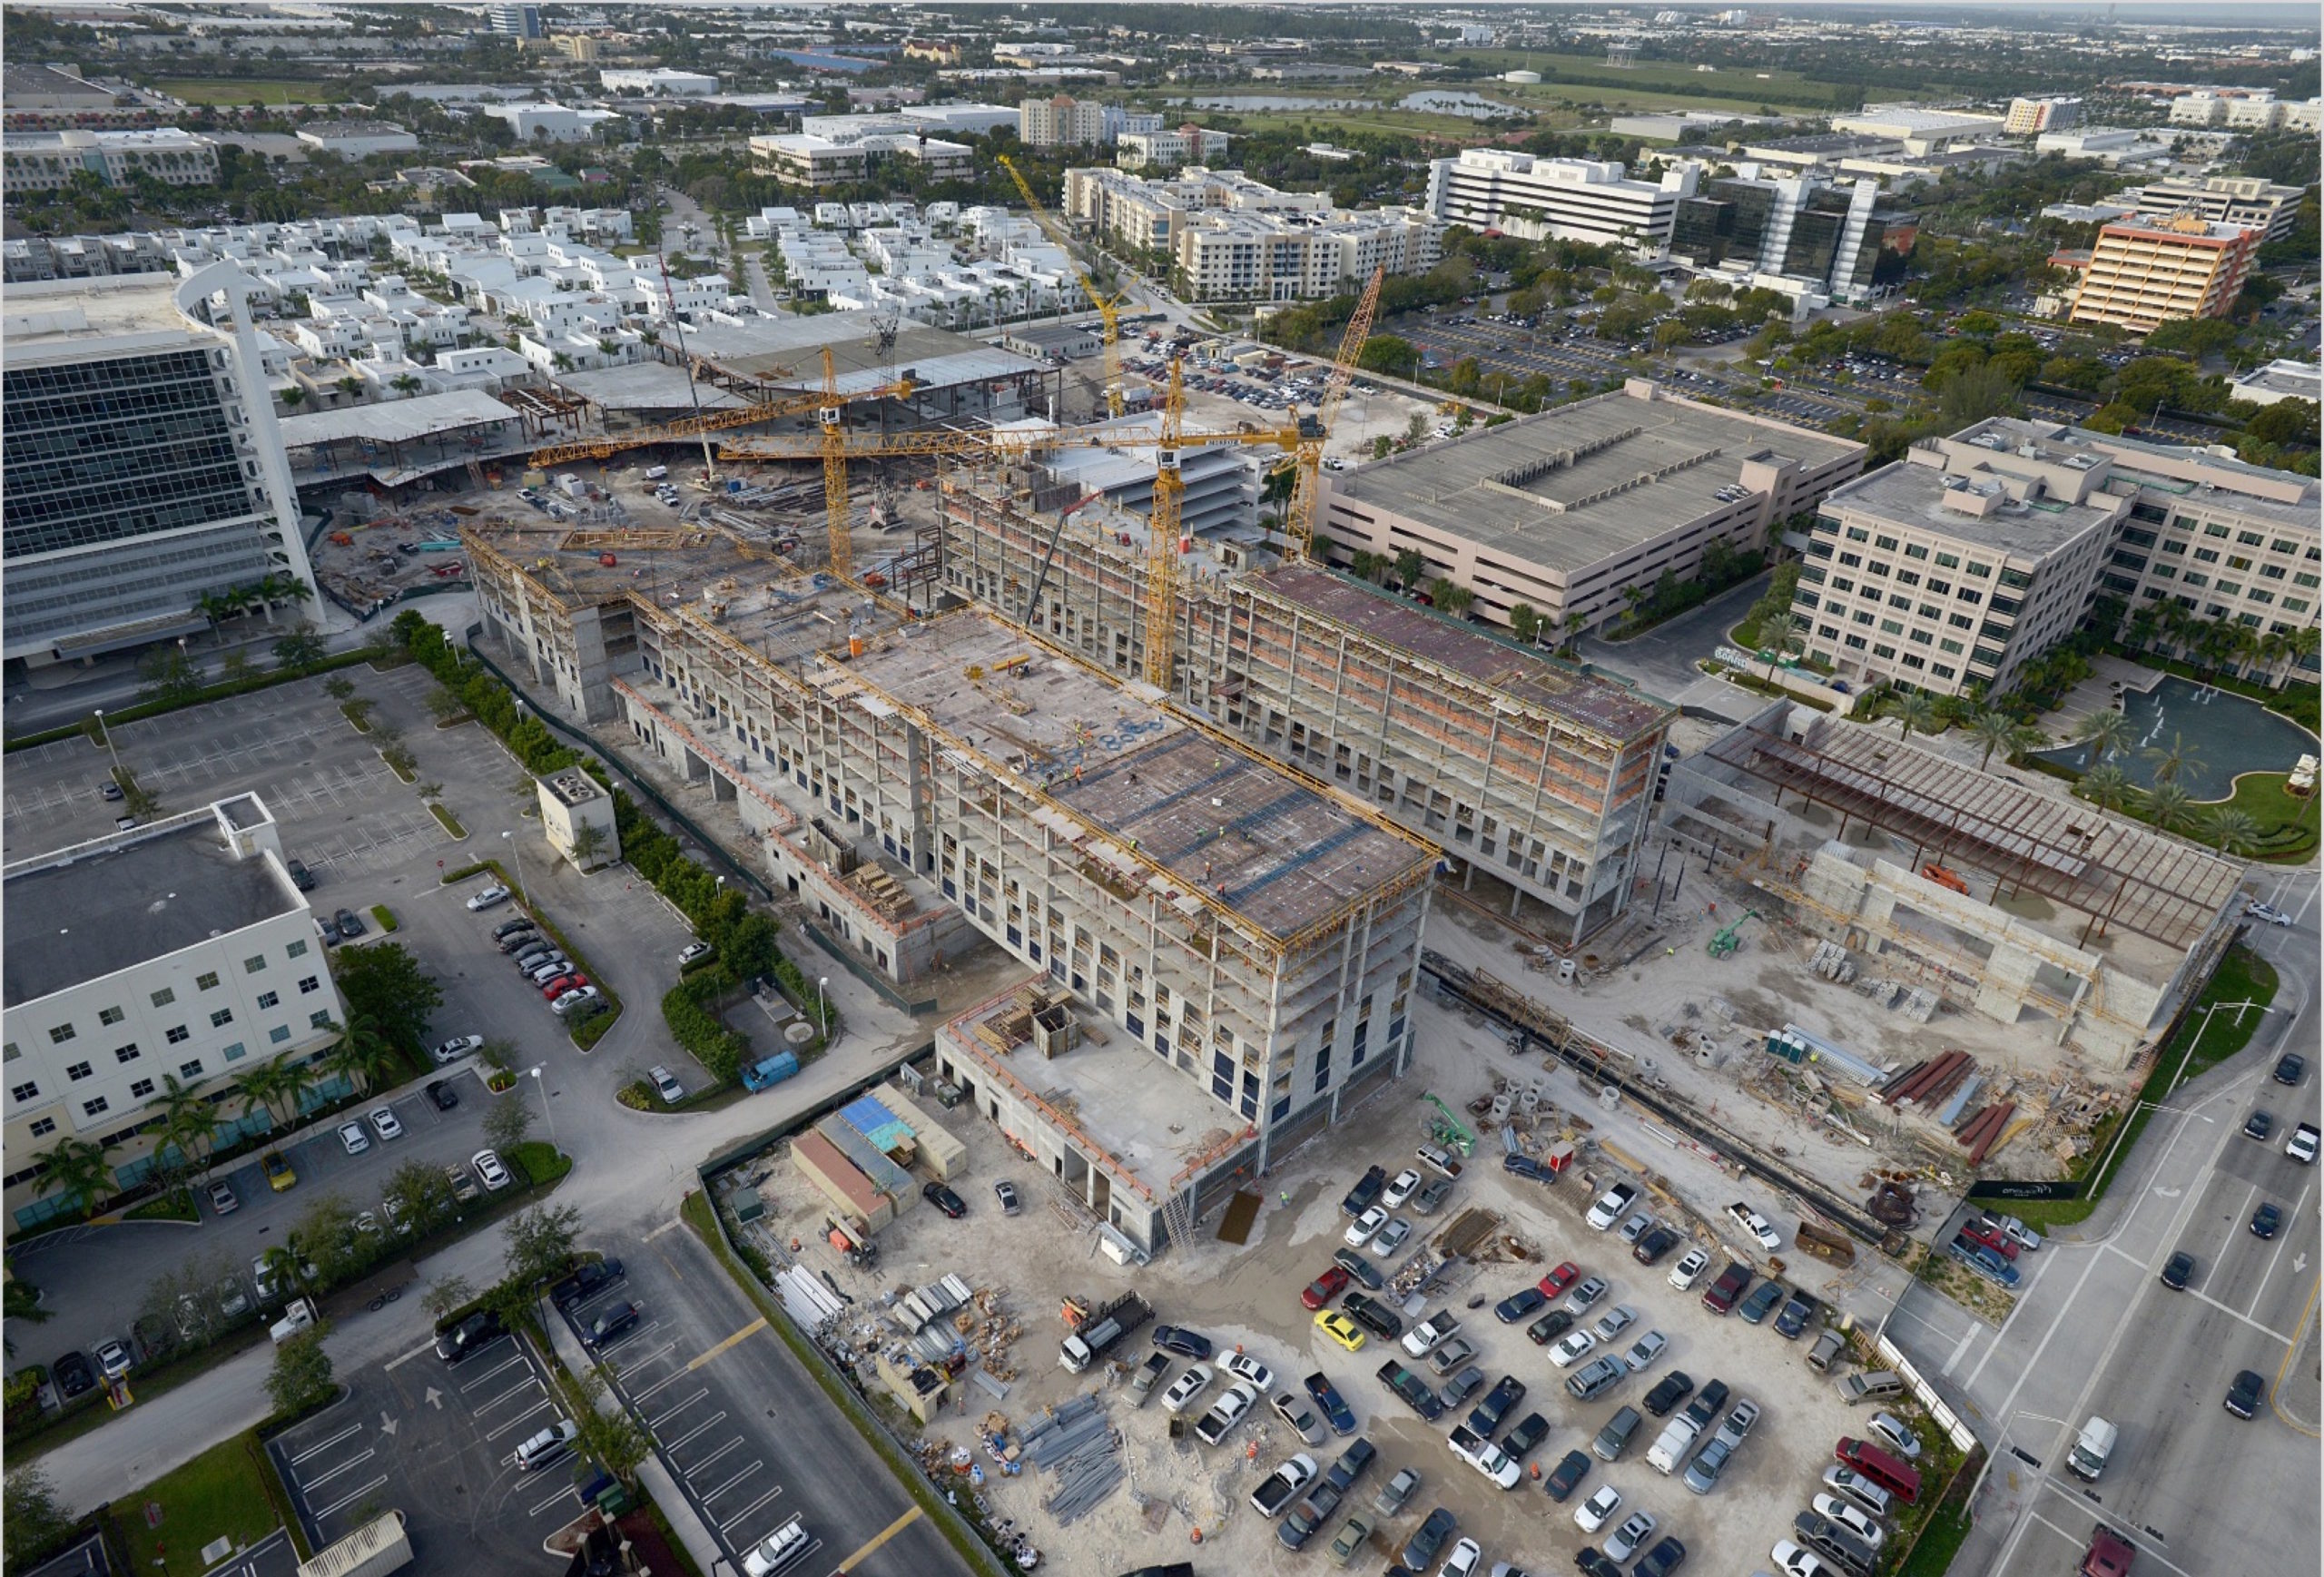 City Place Doral is Topping Off, and the ‘Urbanization’ of Doral Continues